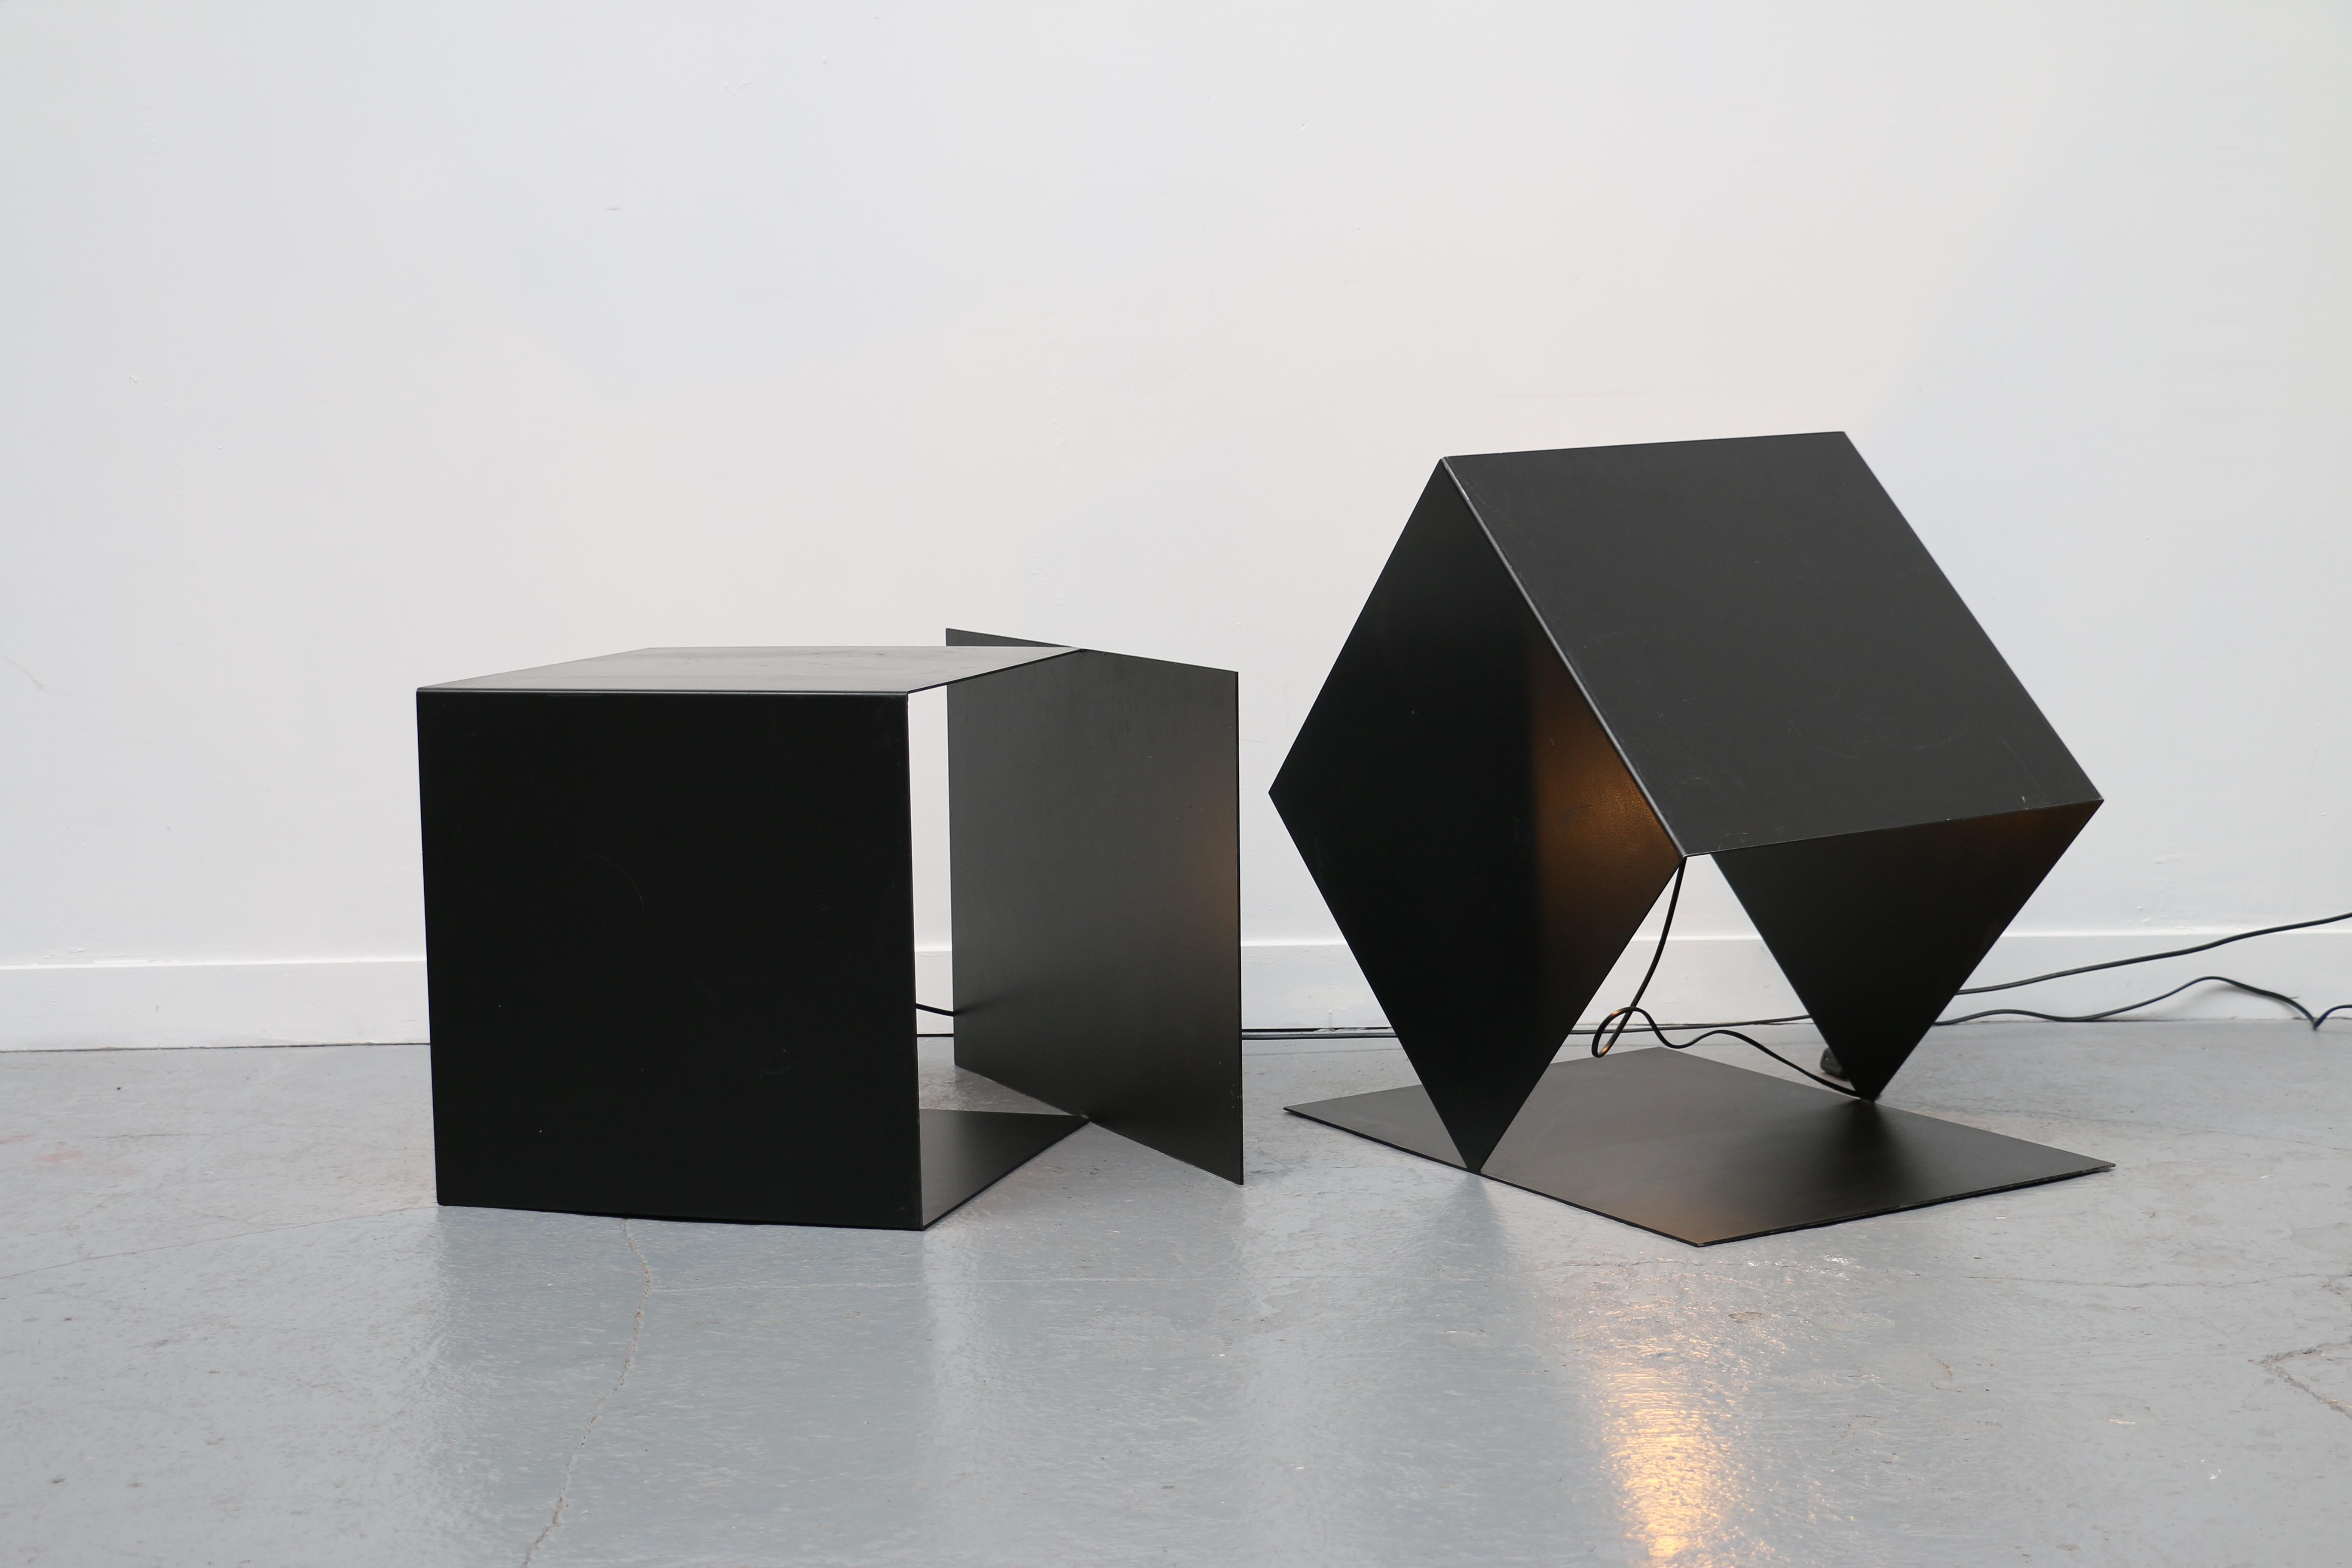 Painted Prototypes Lacquered Sculpture Lamps from François Mascarello, France, 2000s For Sale